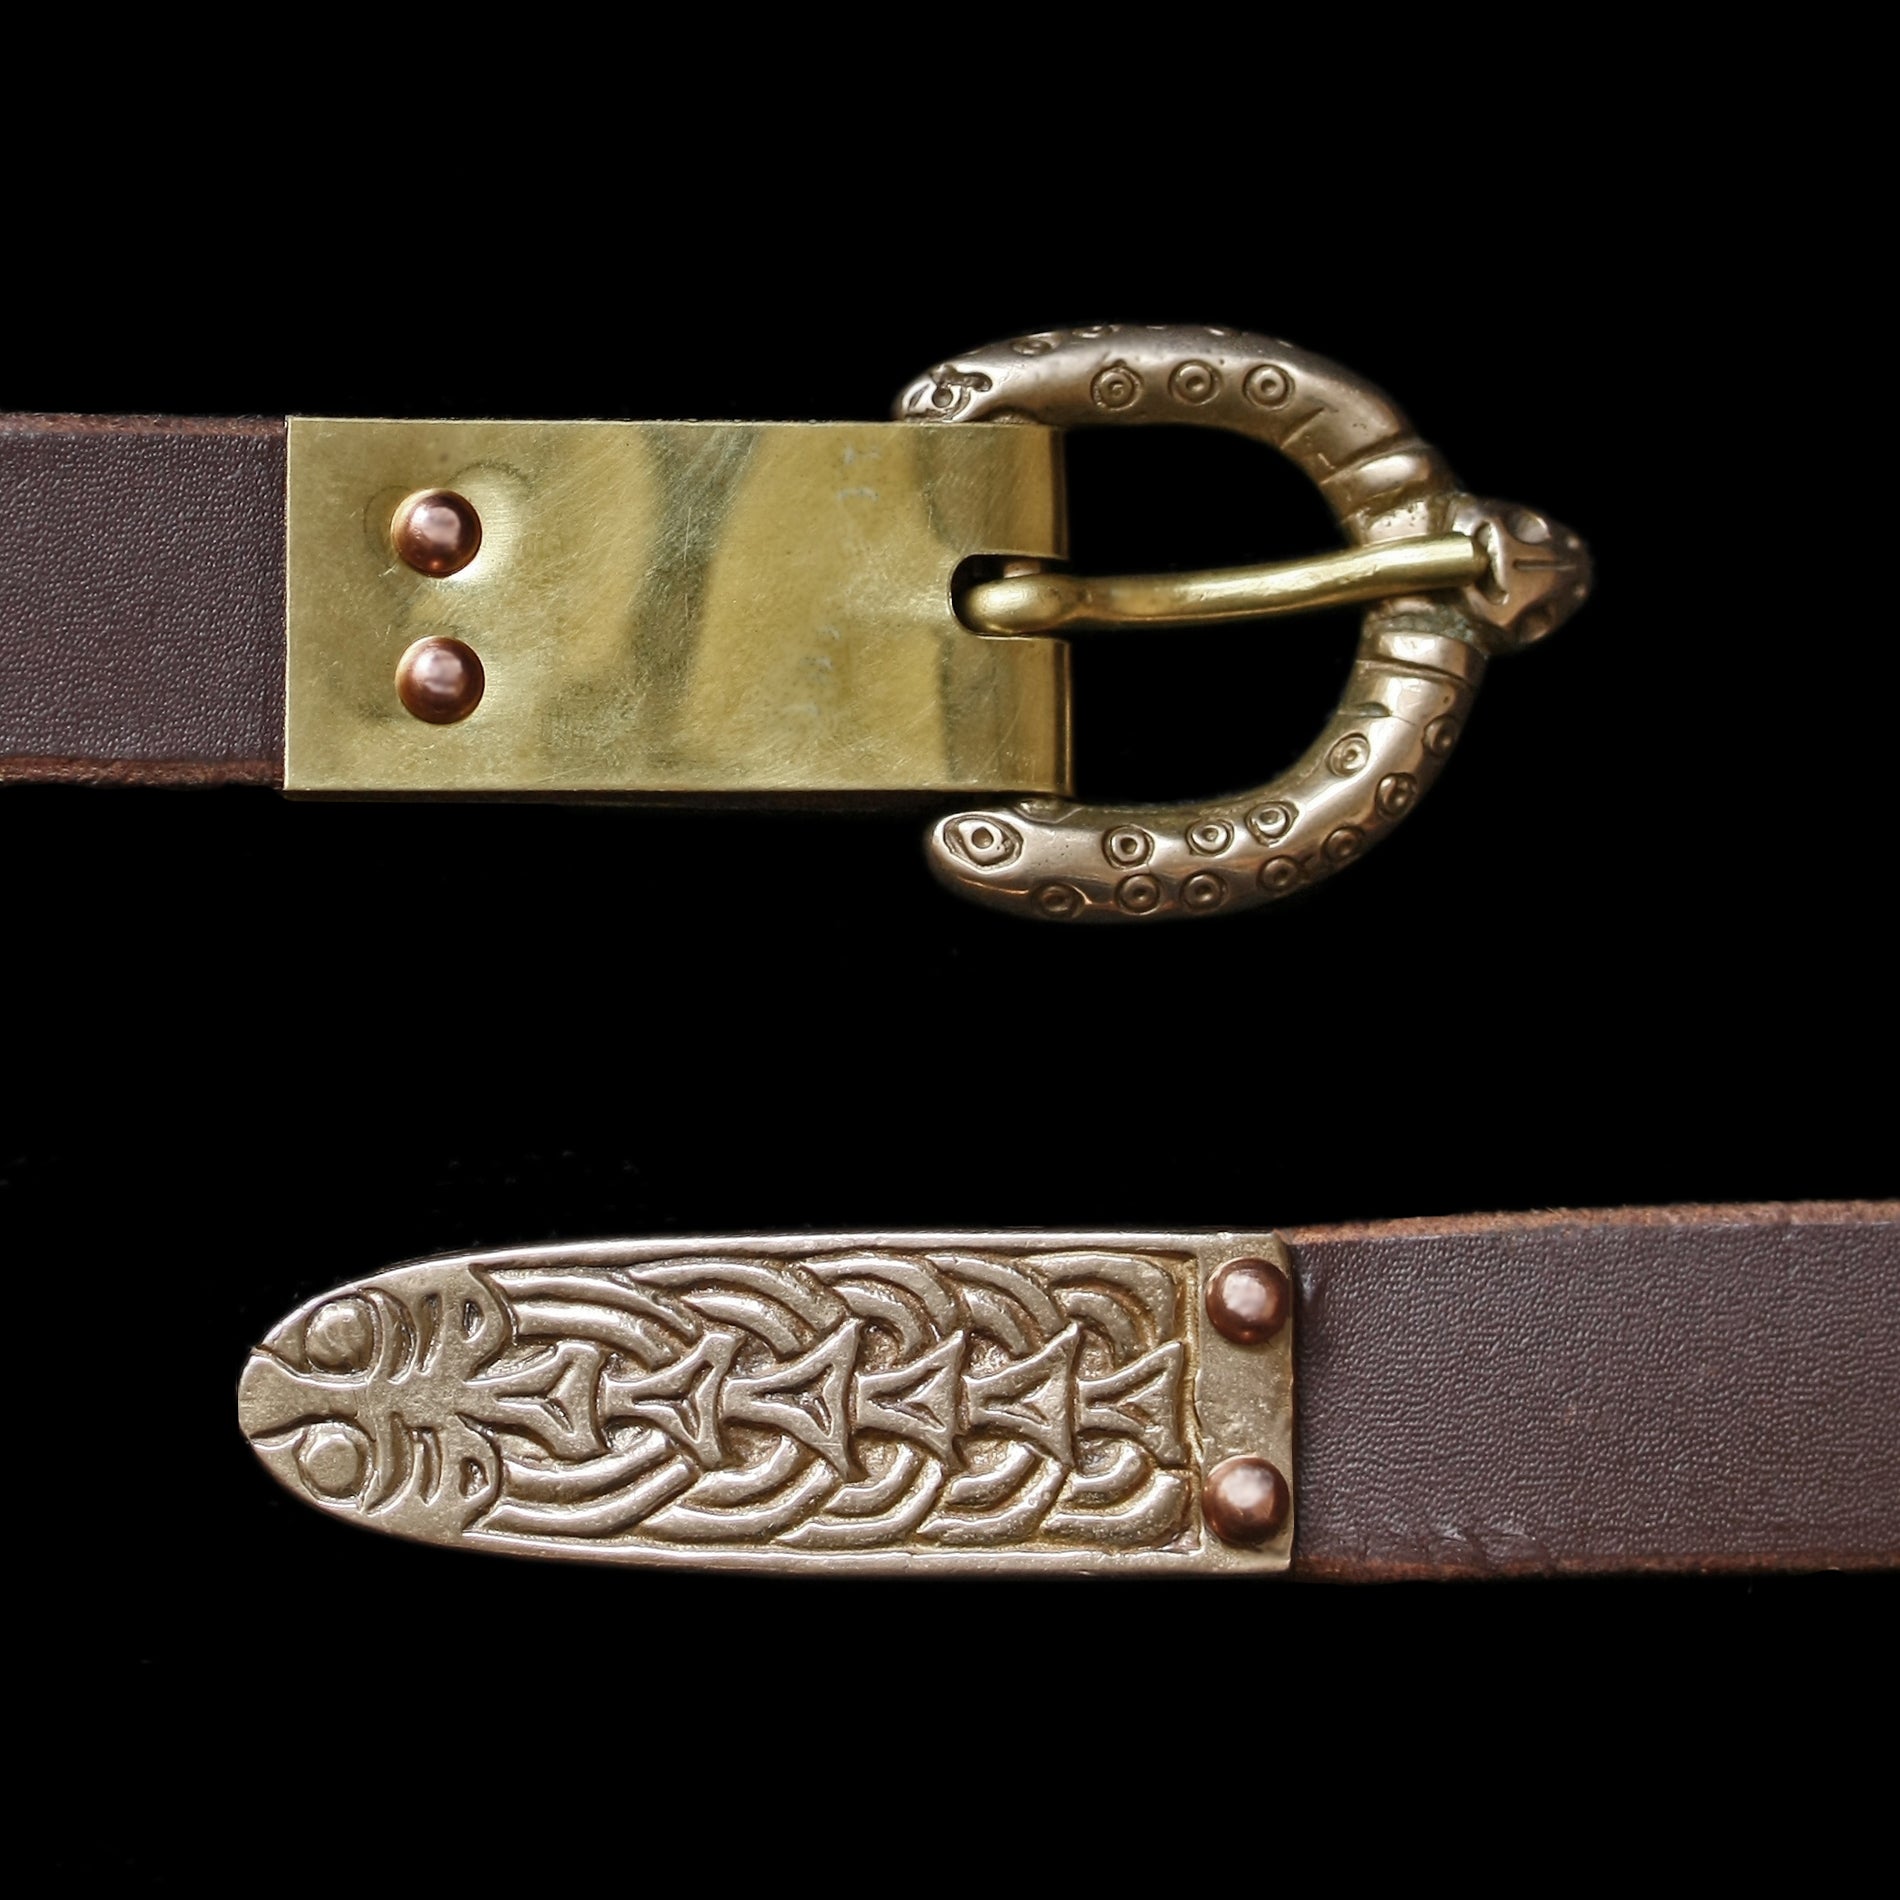 Riveted Buckle Plate & Riveted Strap End